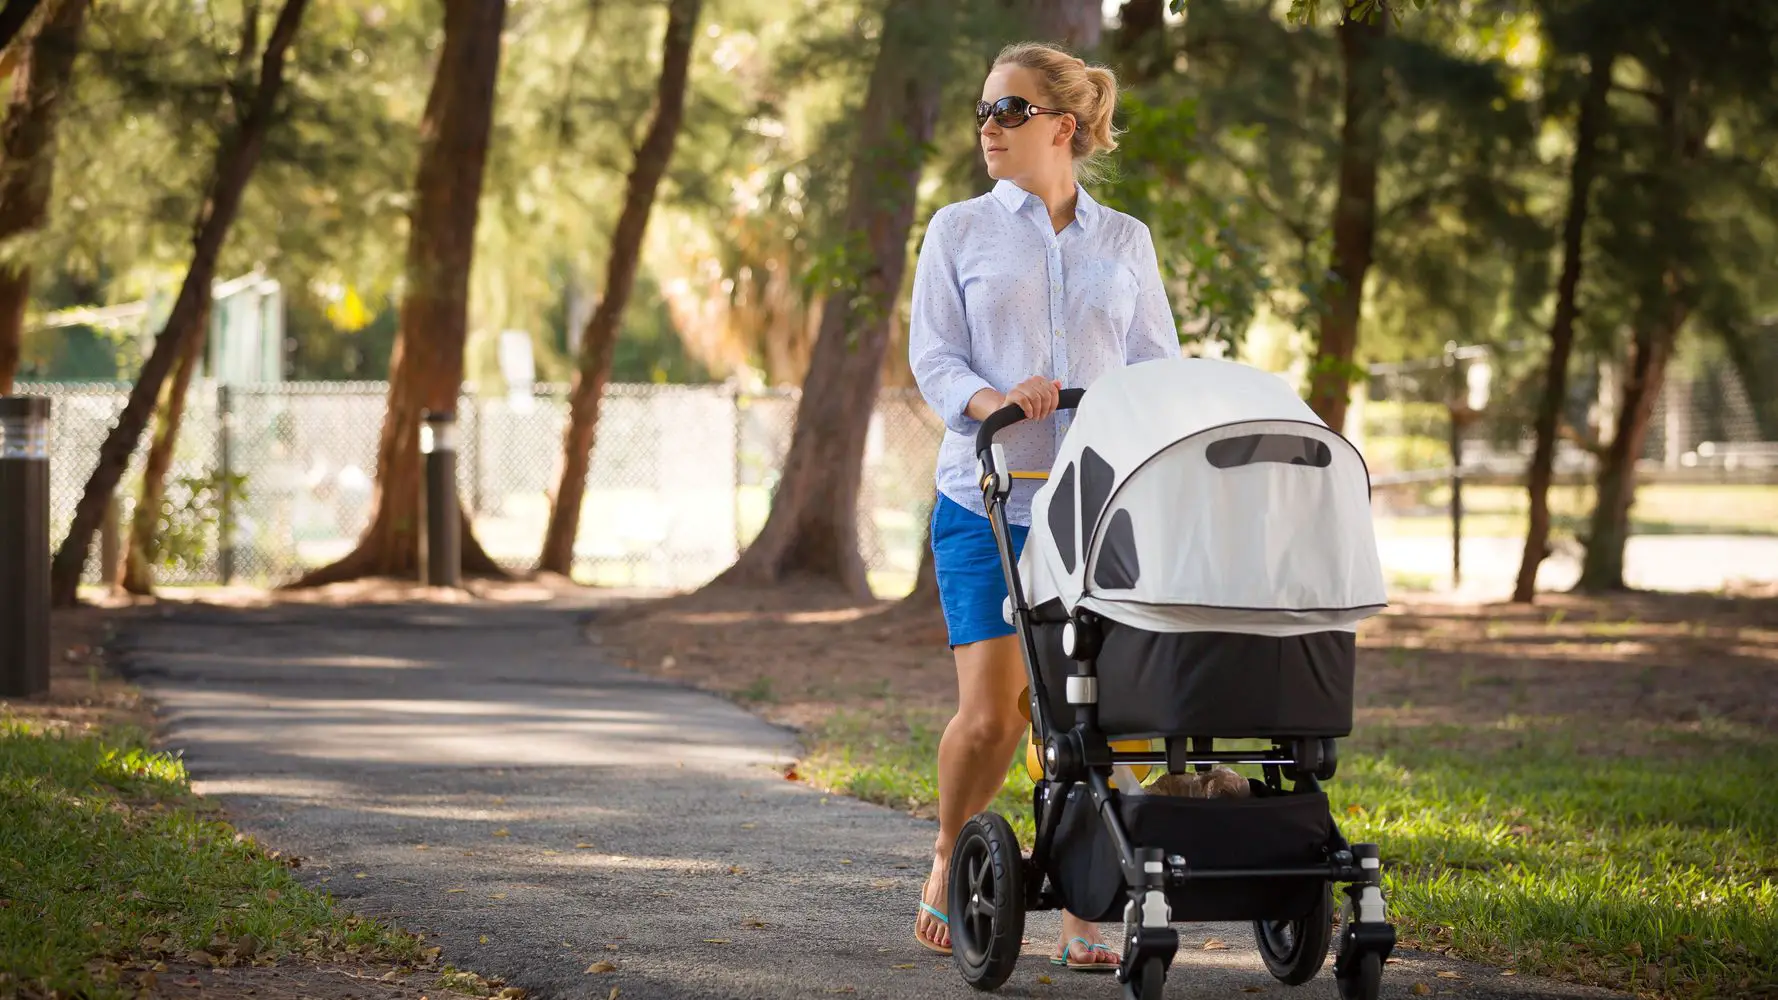 How to keep baby cool in a Stroller?